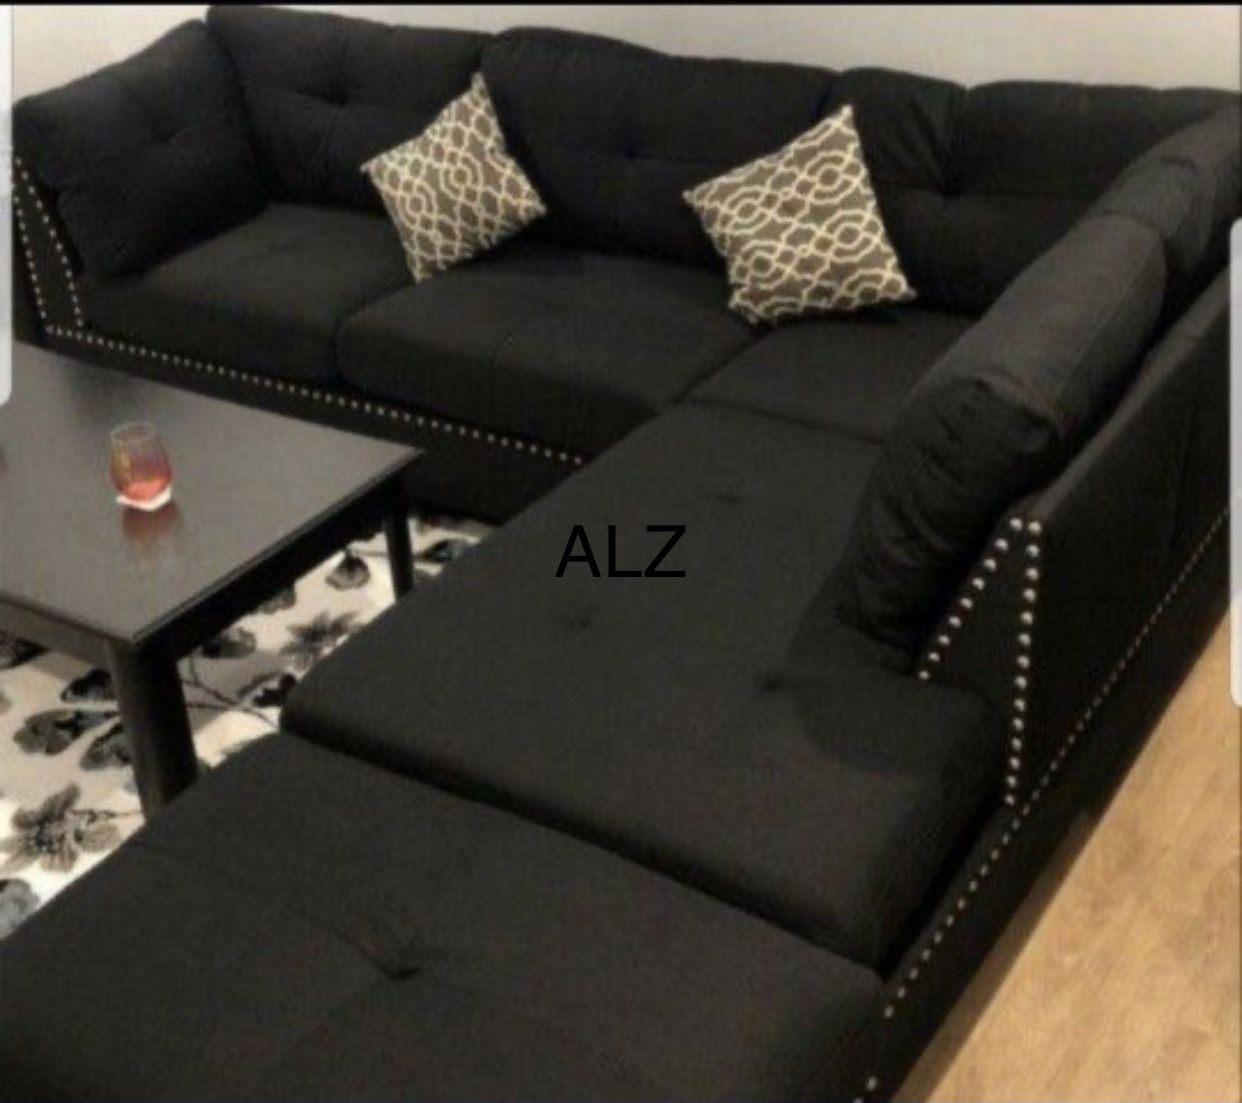 Sectional🙏🍁Same day delivery💁‍♀️Best Offer 💁‍♀️- $39 Down 👍👍